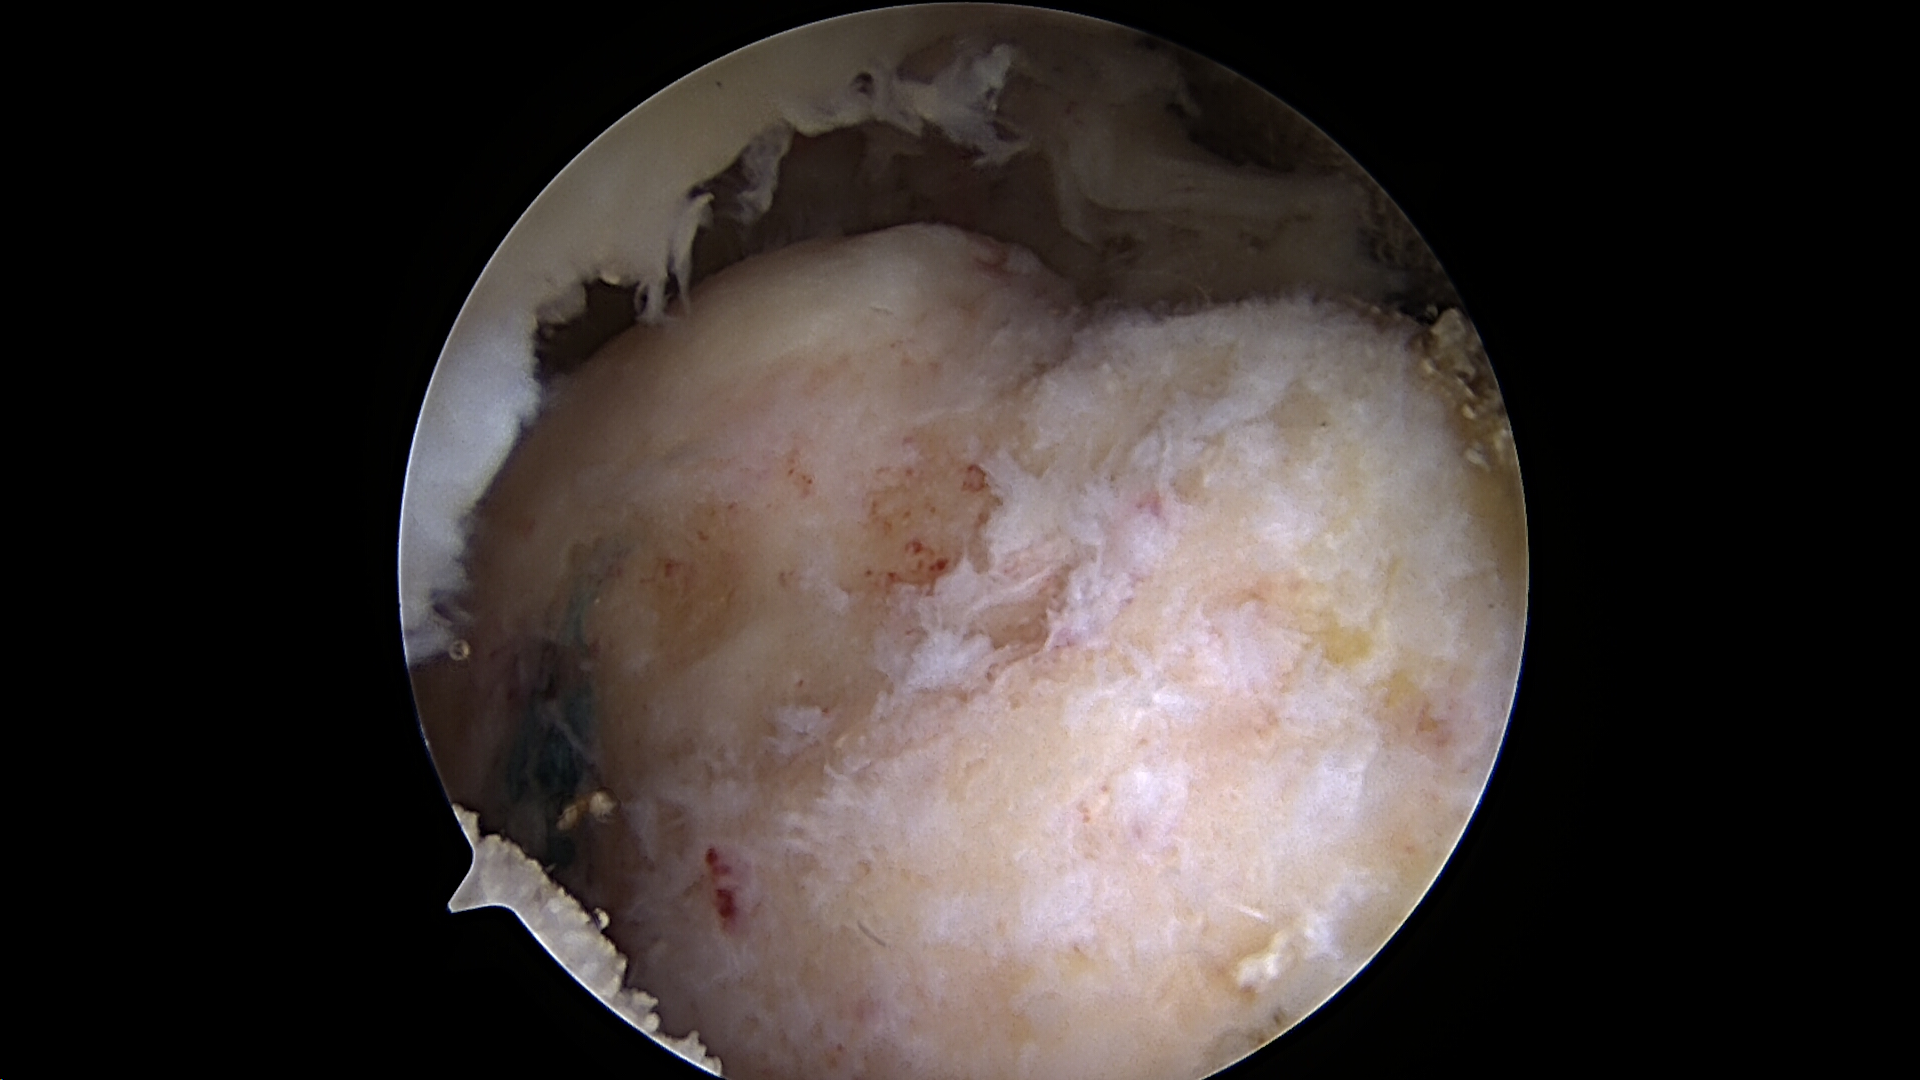 Massive retracted rotator cuff tear viewed from the posterior portal